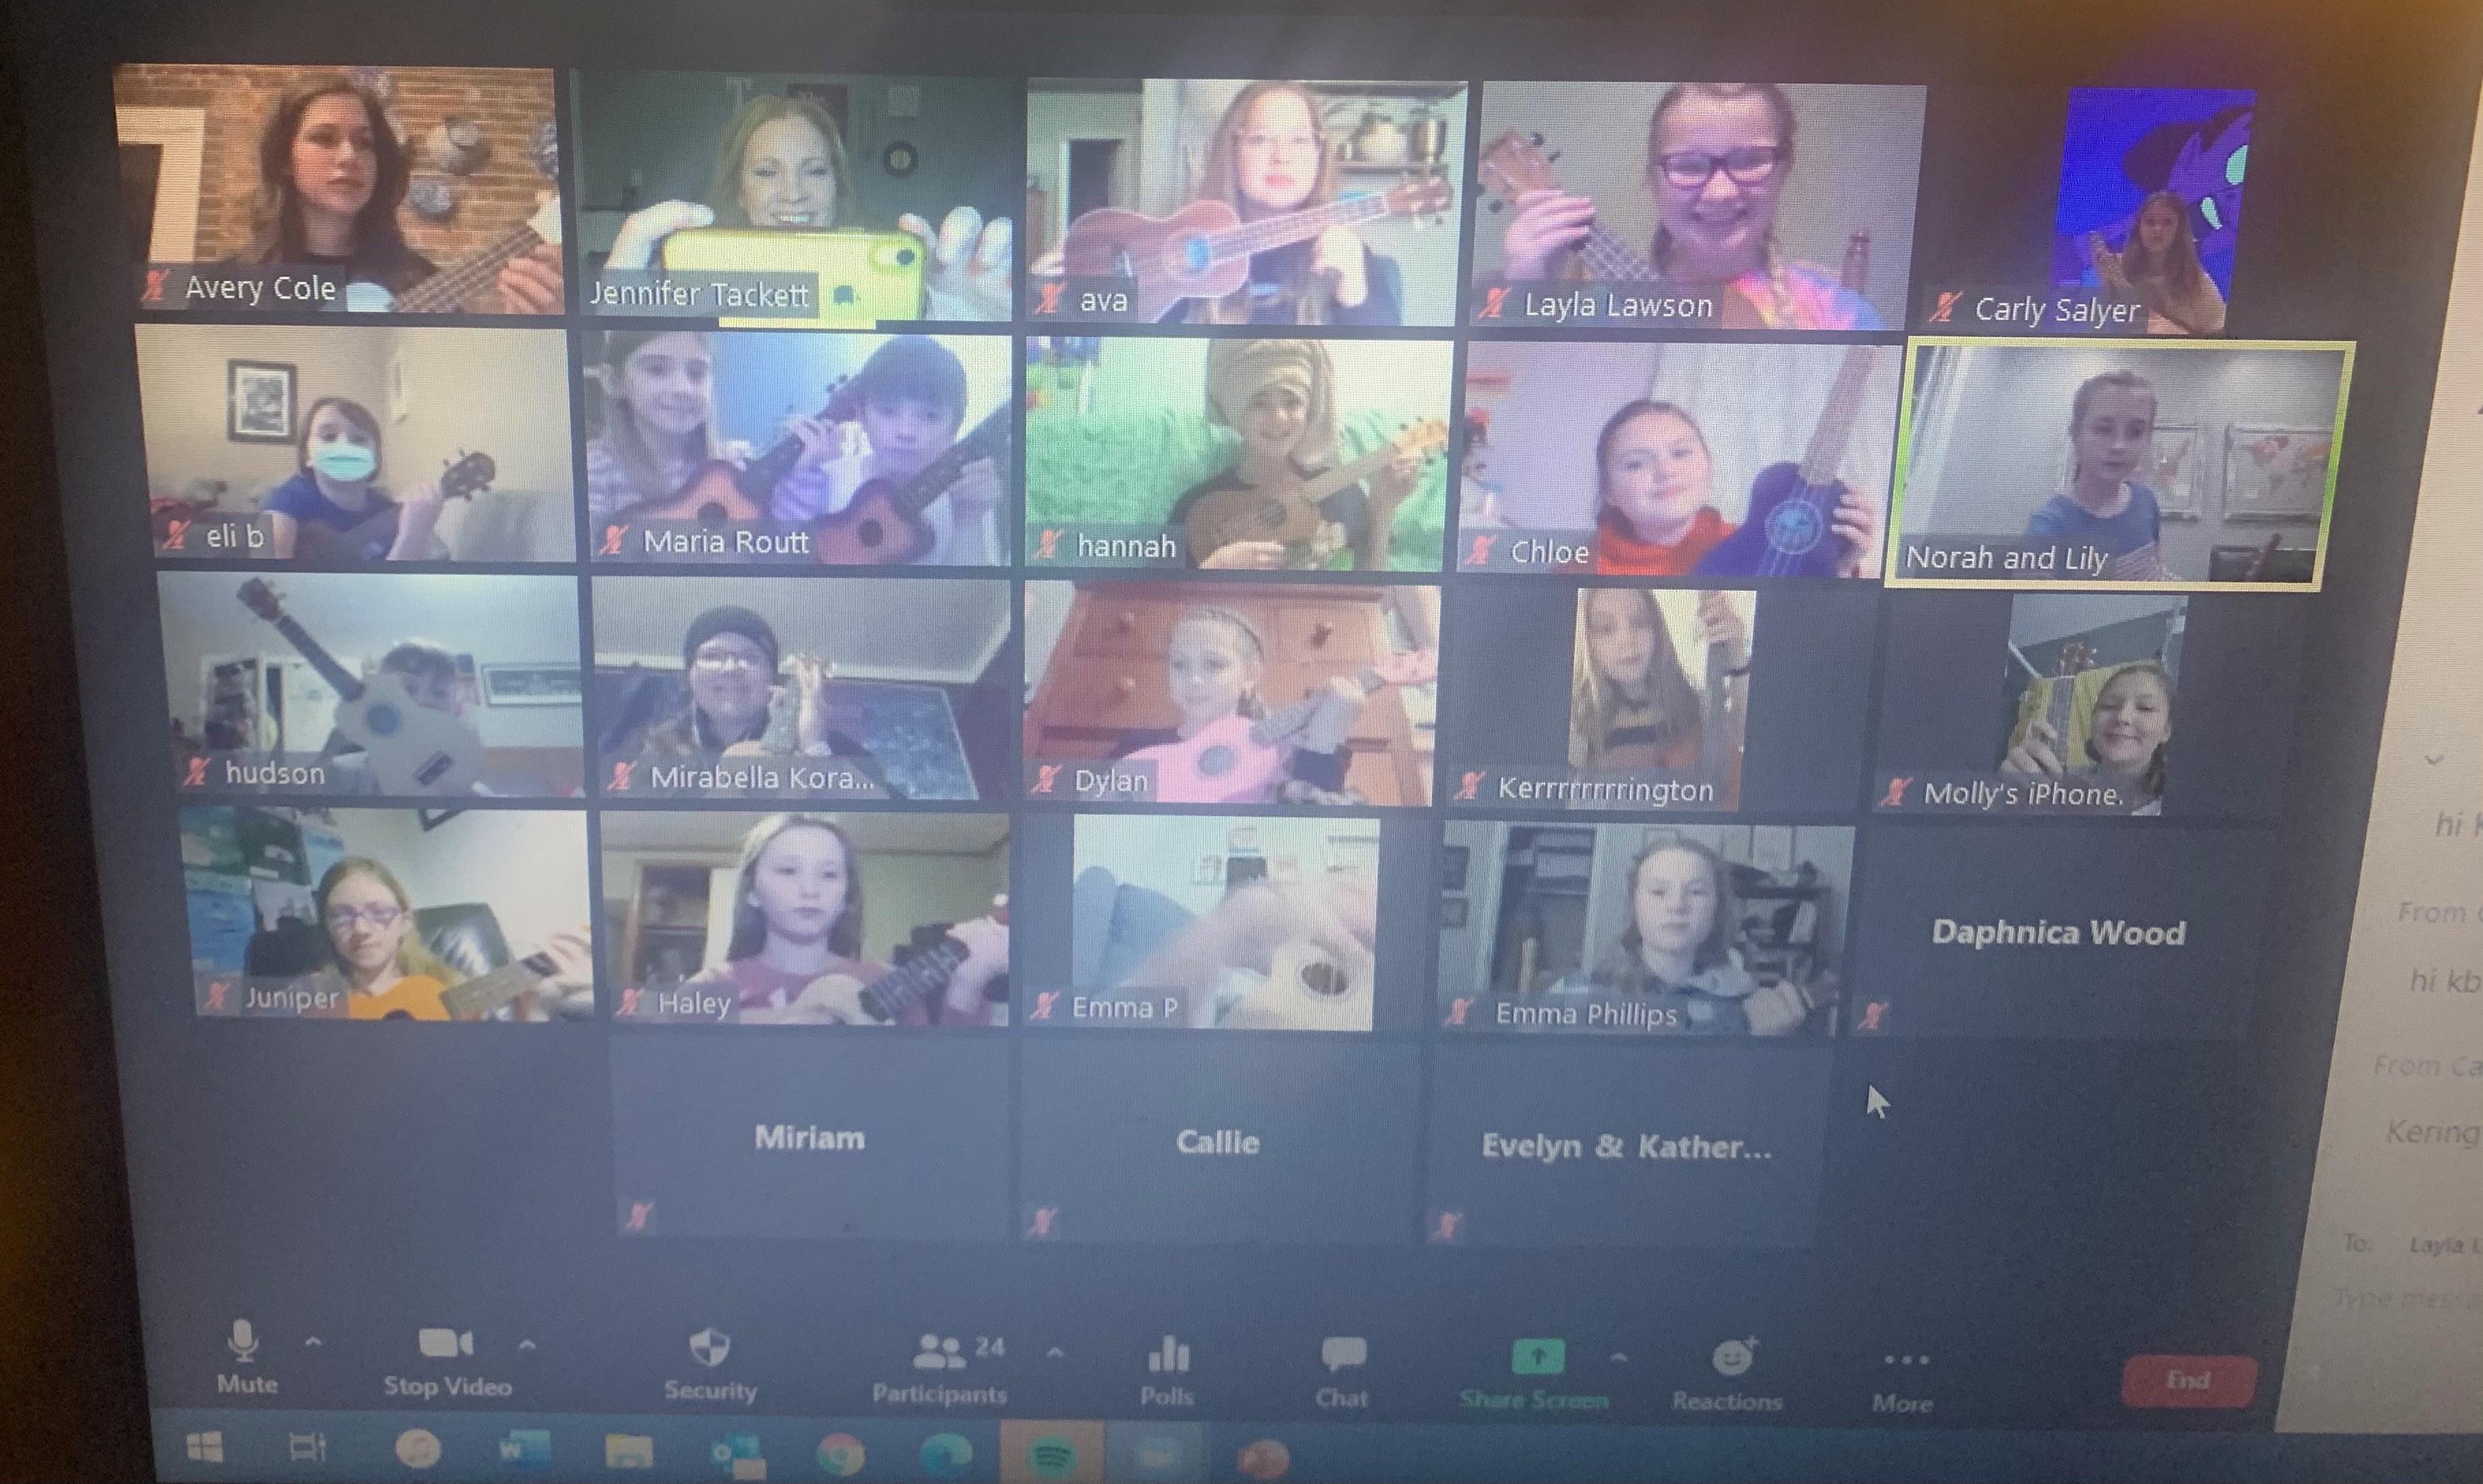 The virtual ukulele club was one of the popular online programs for Kentucky 4-H last year. Photo courtesy of Jennifer Tackett, 4-H youth development specialist.